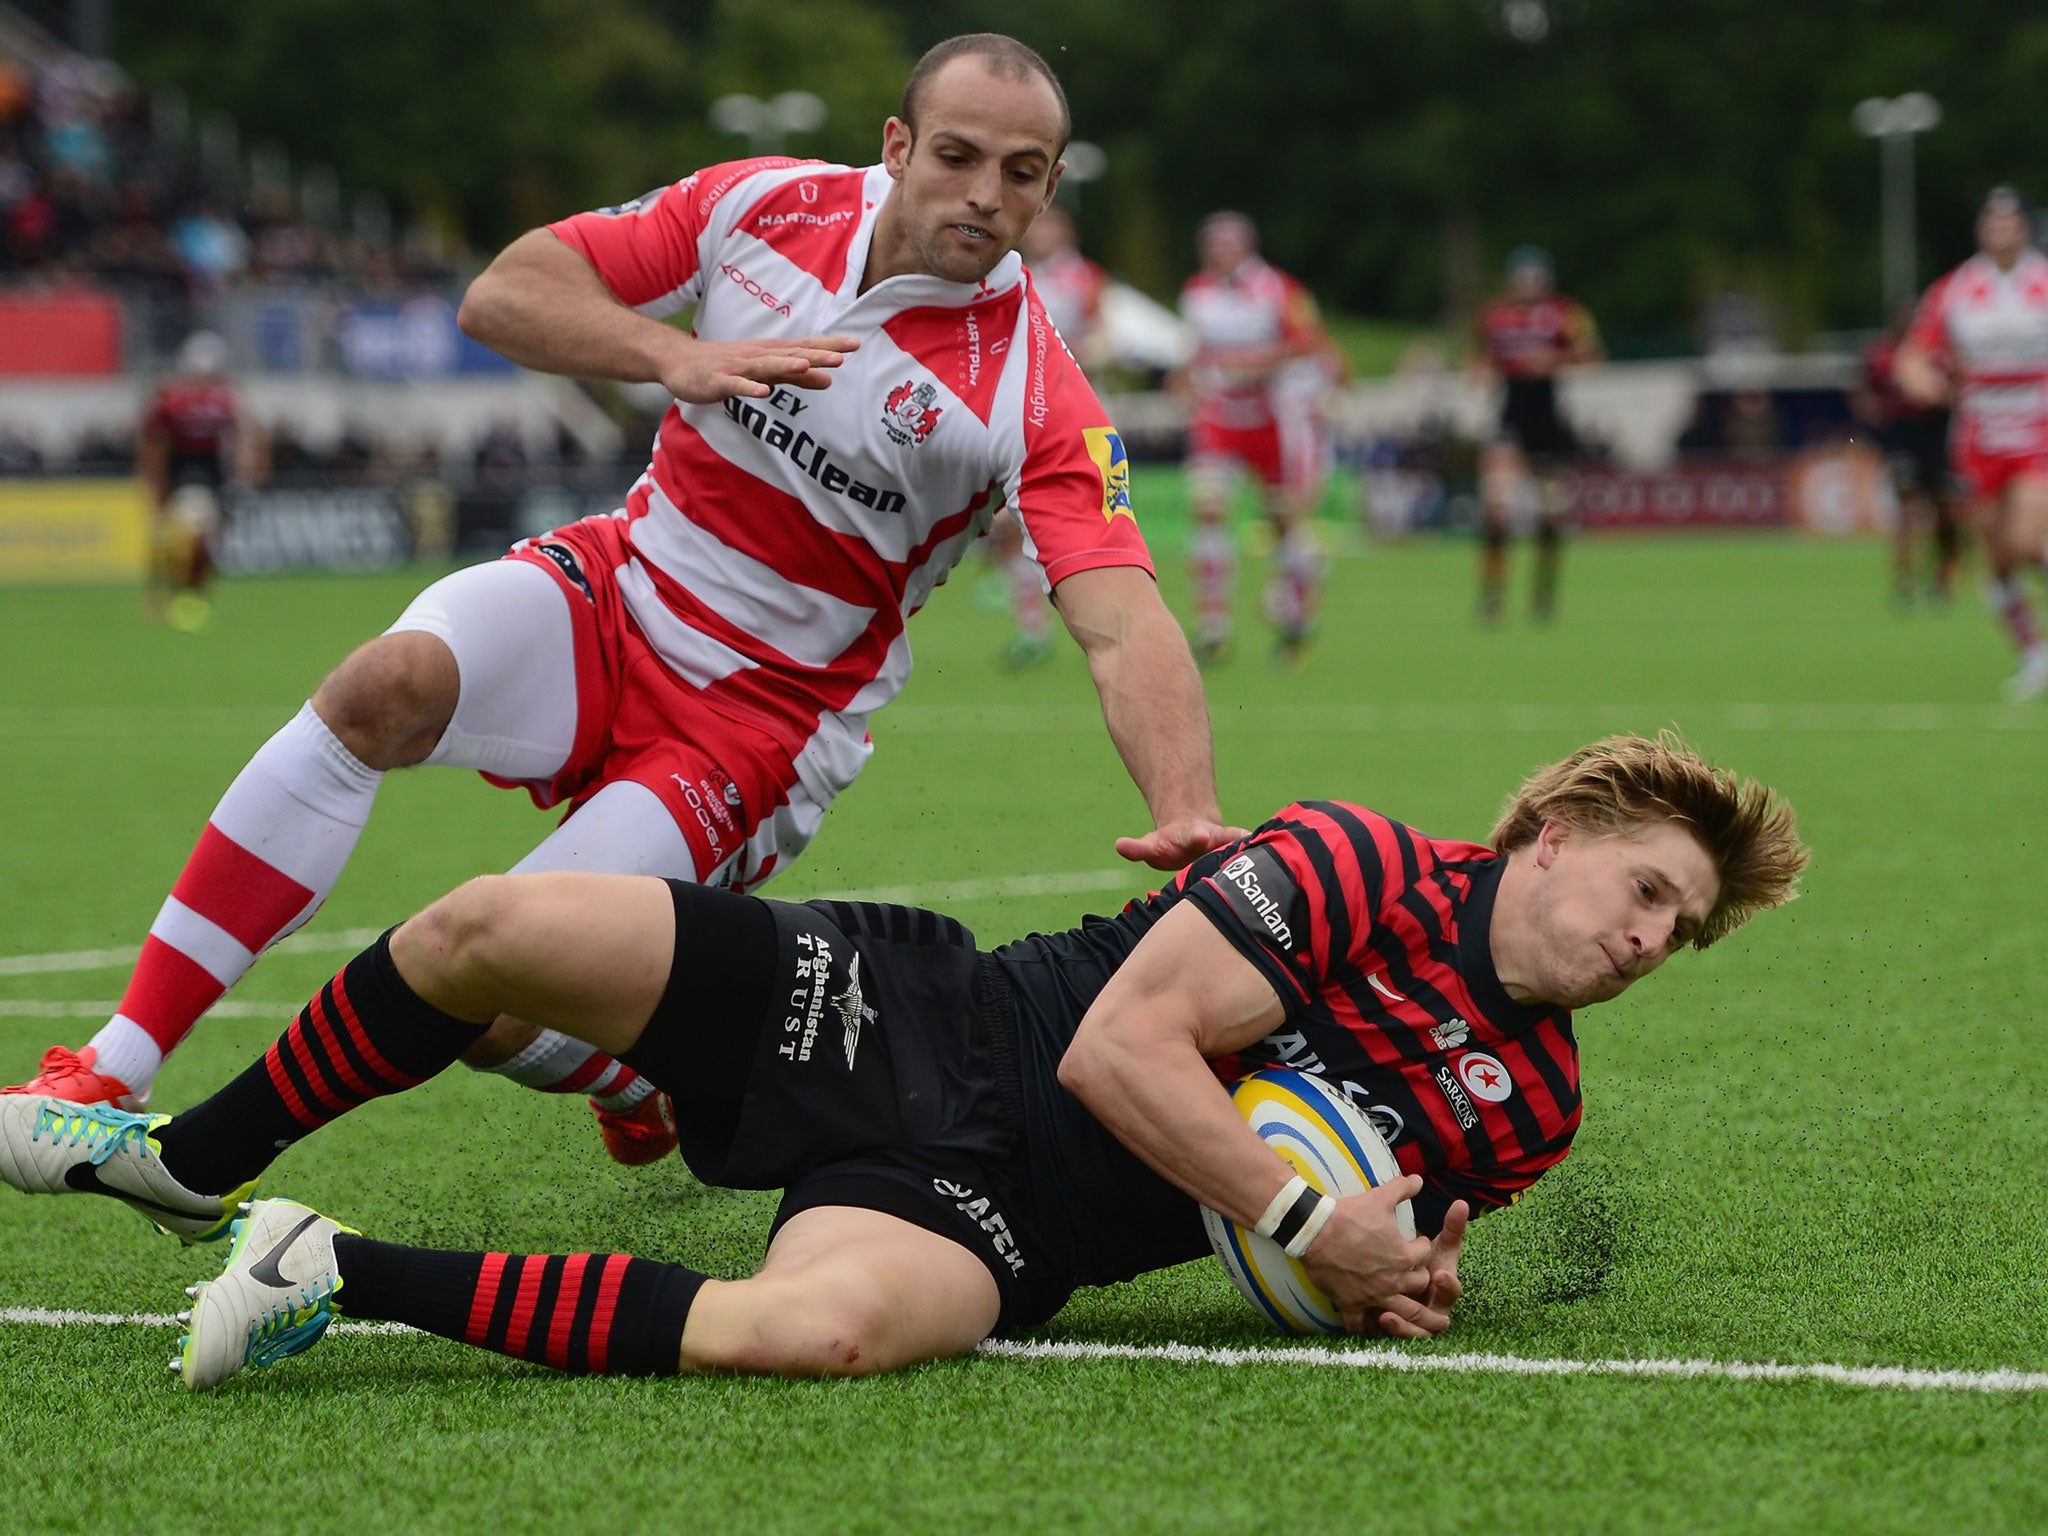 David Streetle of Saracens beats the tackle of Charlie Sharples of Gloucester to score a try